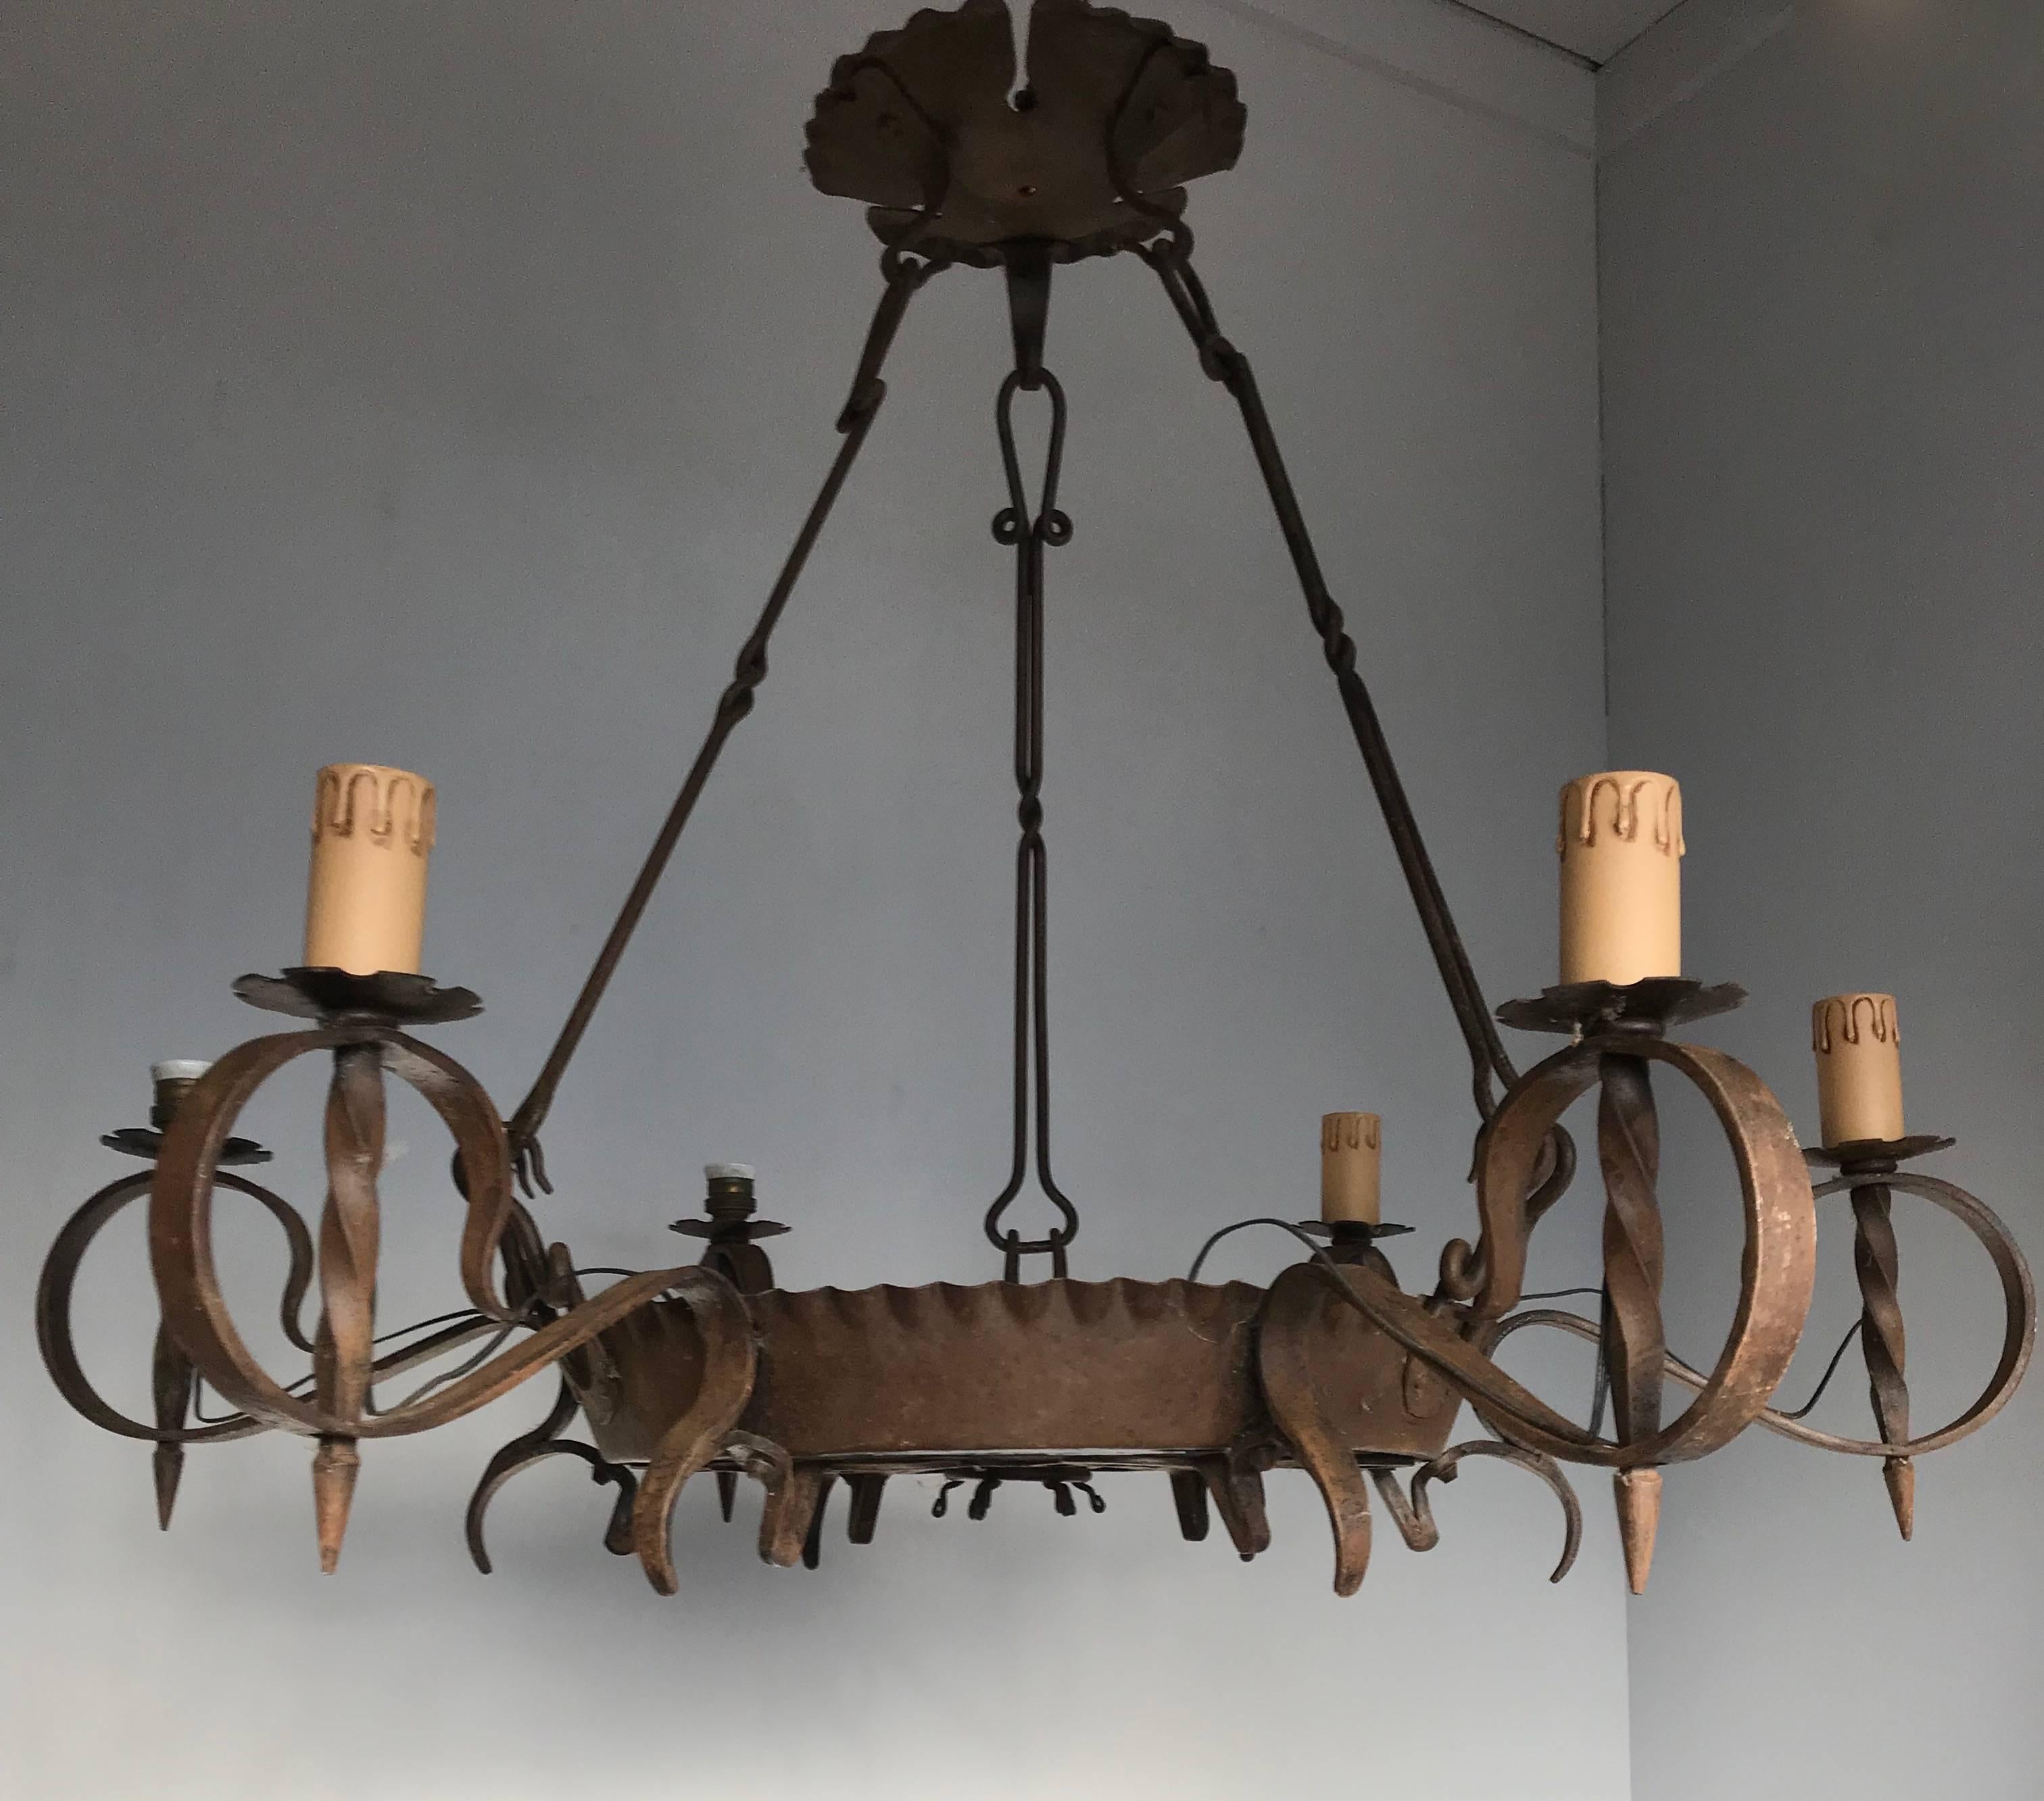 Large and round, forged in fire chandelier.

This large and all-handcrafted chandelier is another one of our recent great finds. The beautiful shape and the many details make this one of a kind chandelier an absolute joy to own and look at. Apart